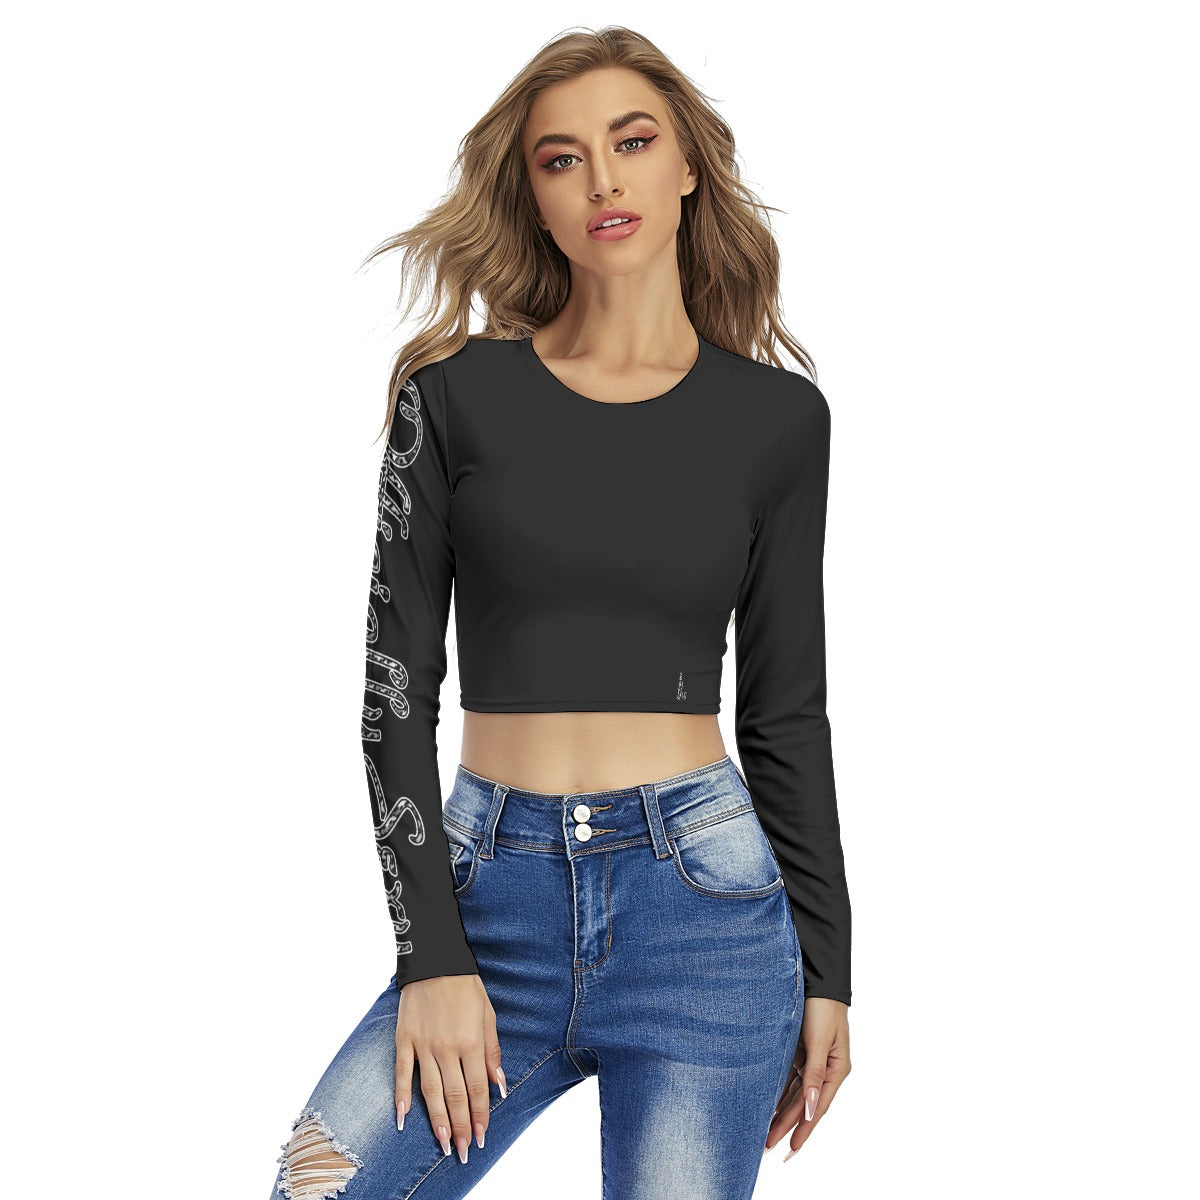 Officially Sexy Snow Leopard Print Collection Women's Black Round Neck Crop Top Long Sleeve T-Shirt (English) 1